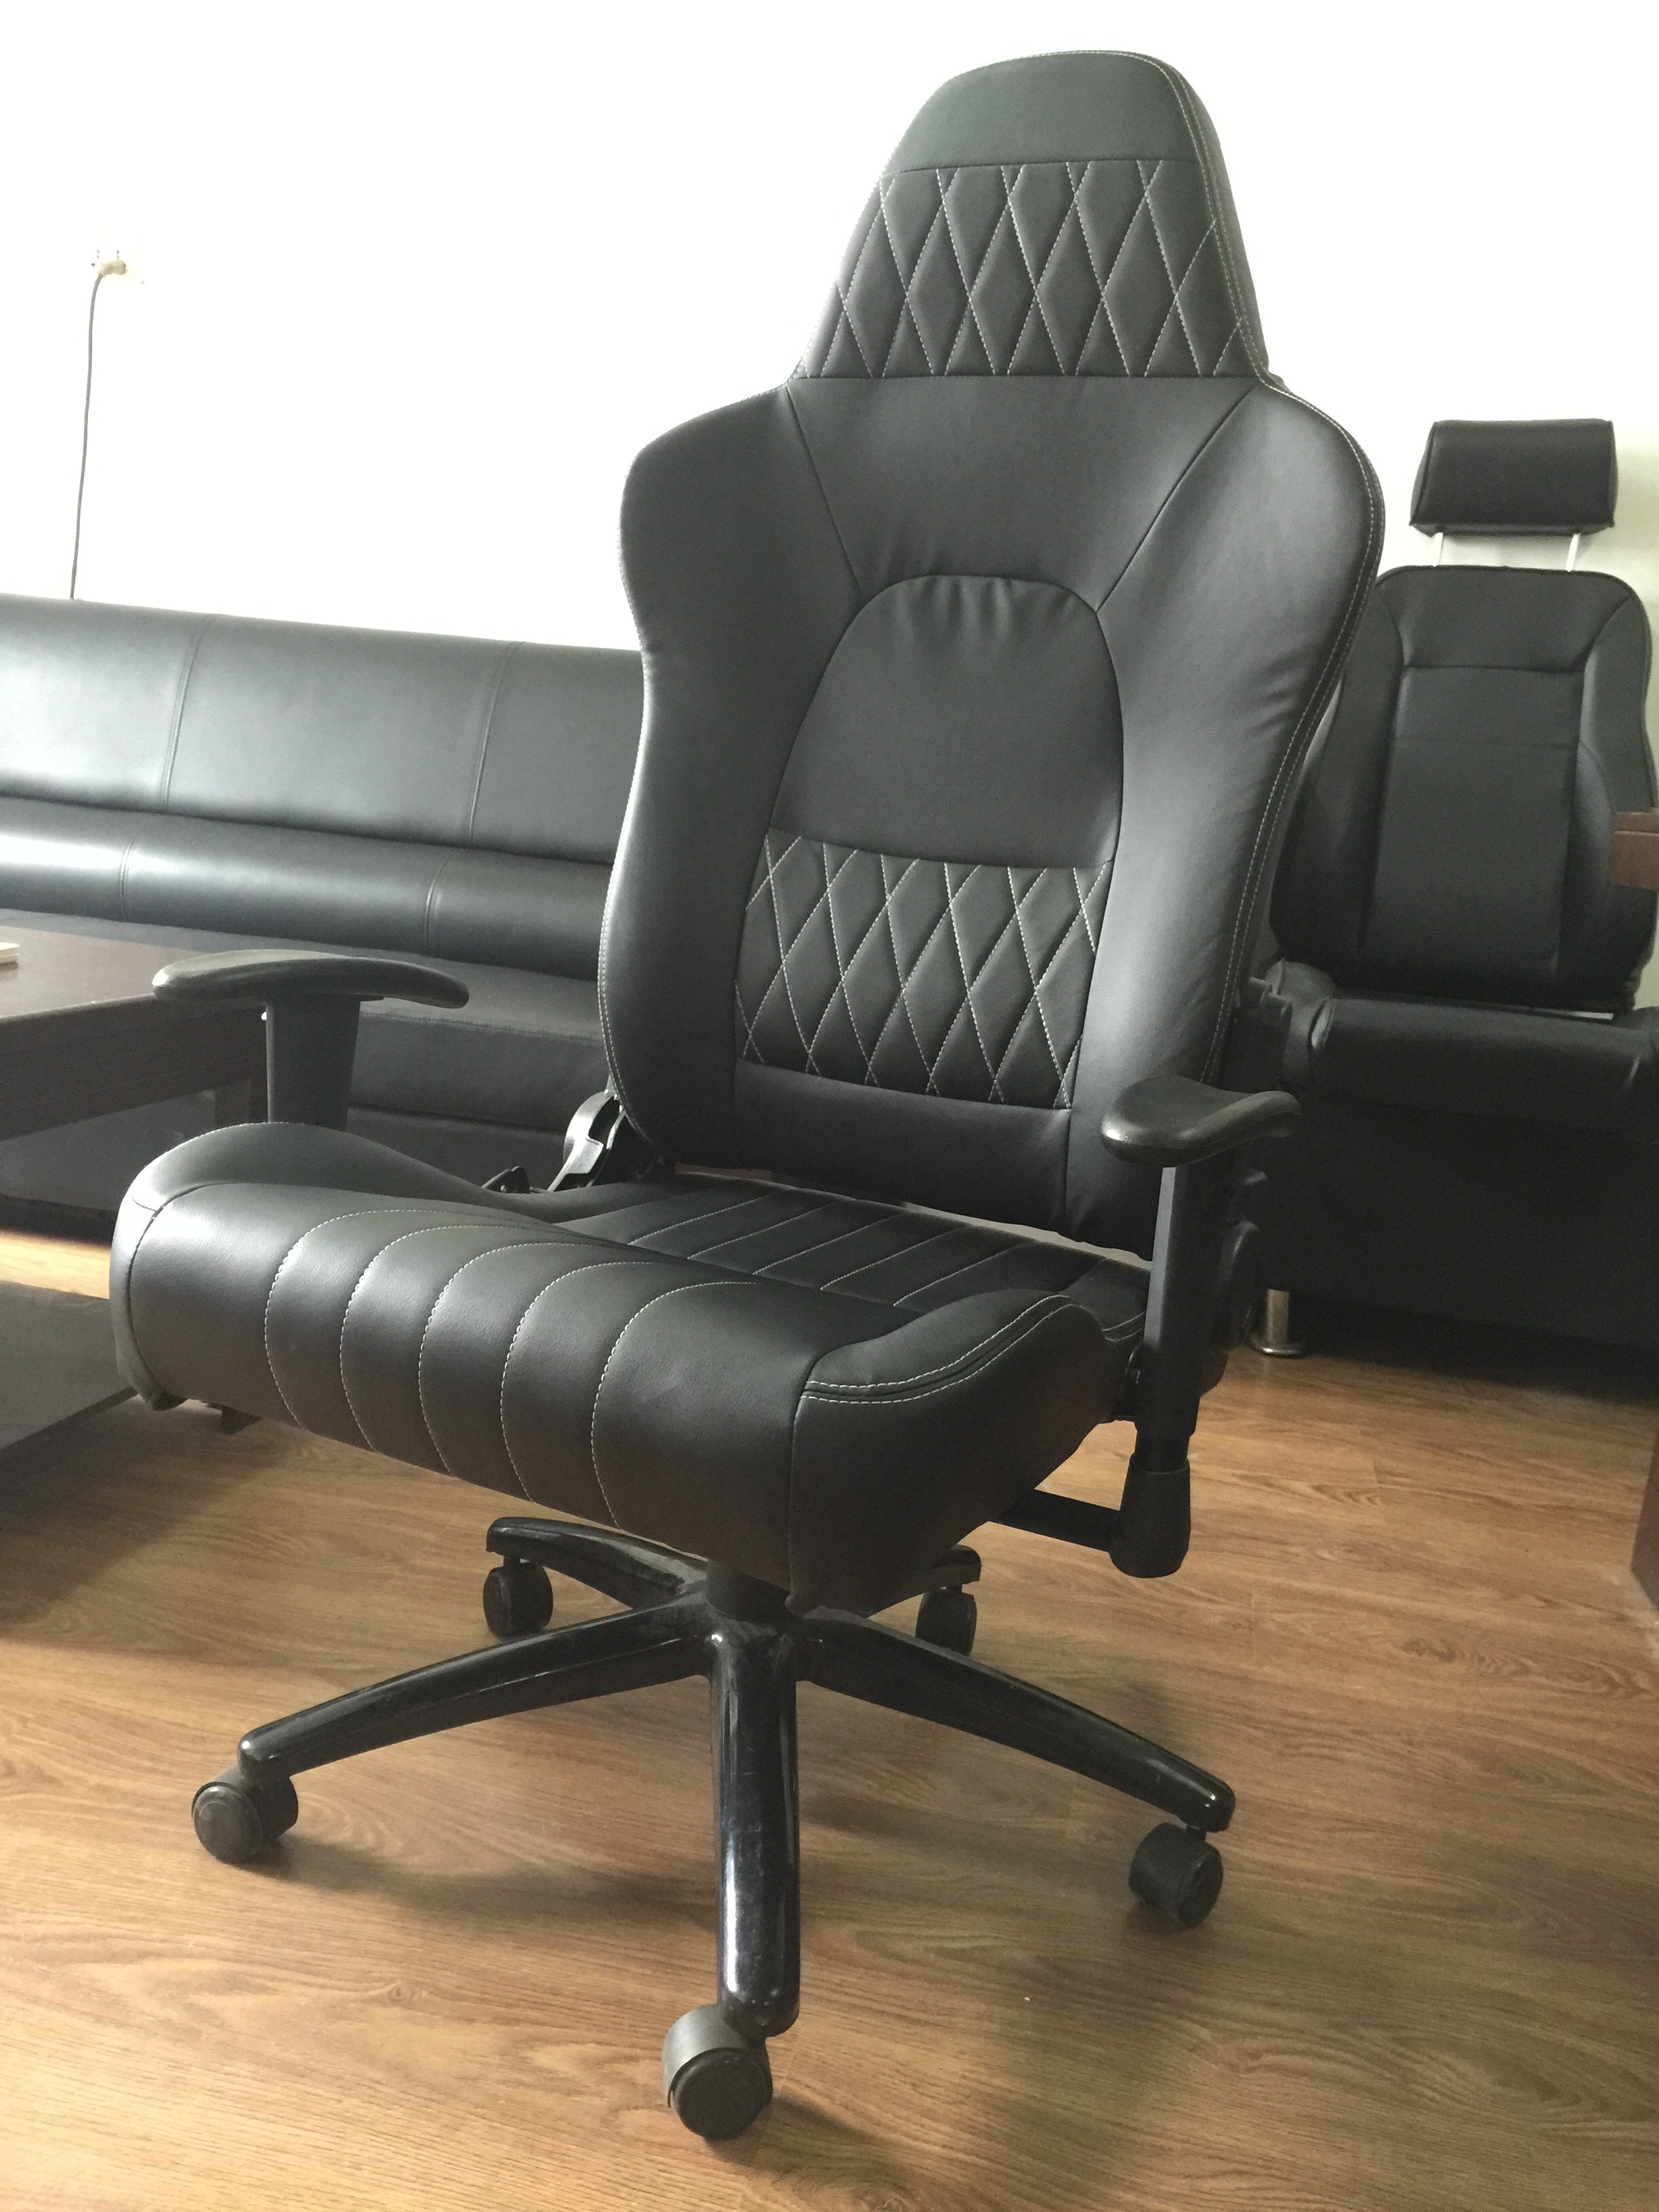 Swivel Office Chair Without Wheels Armless Yorker | Chair Design